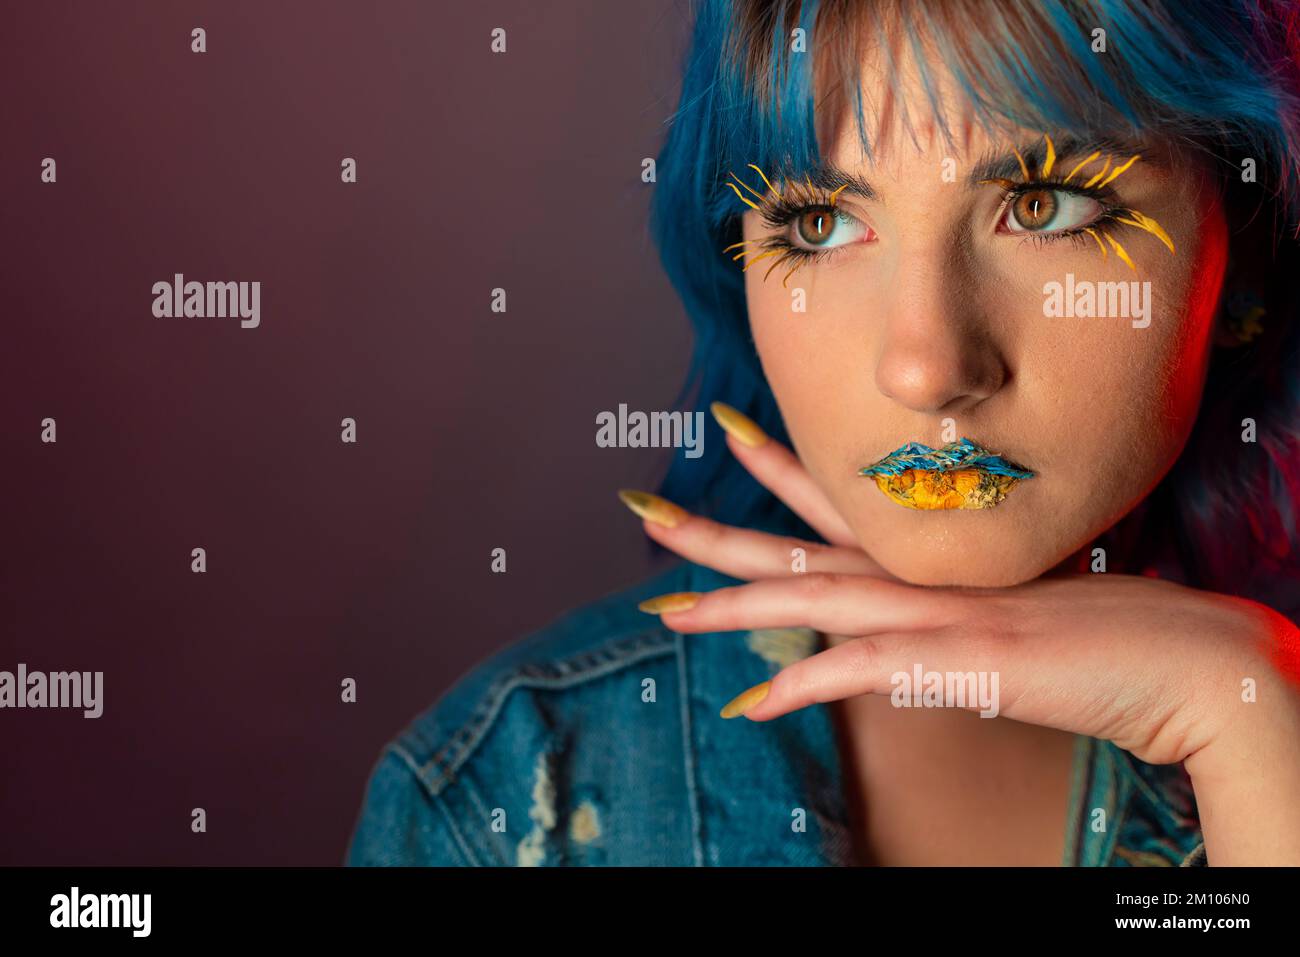 Woman in blue and yellow tones Stock Photo